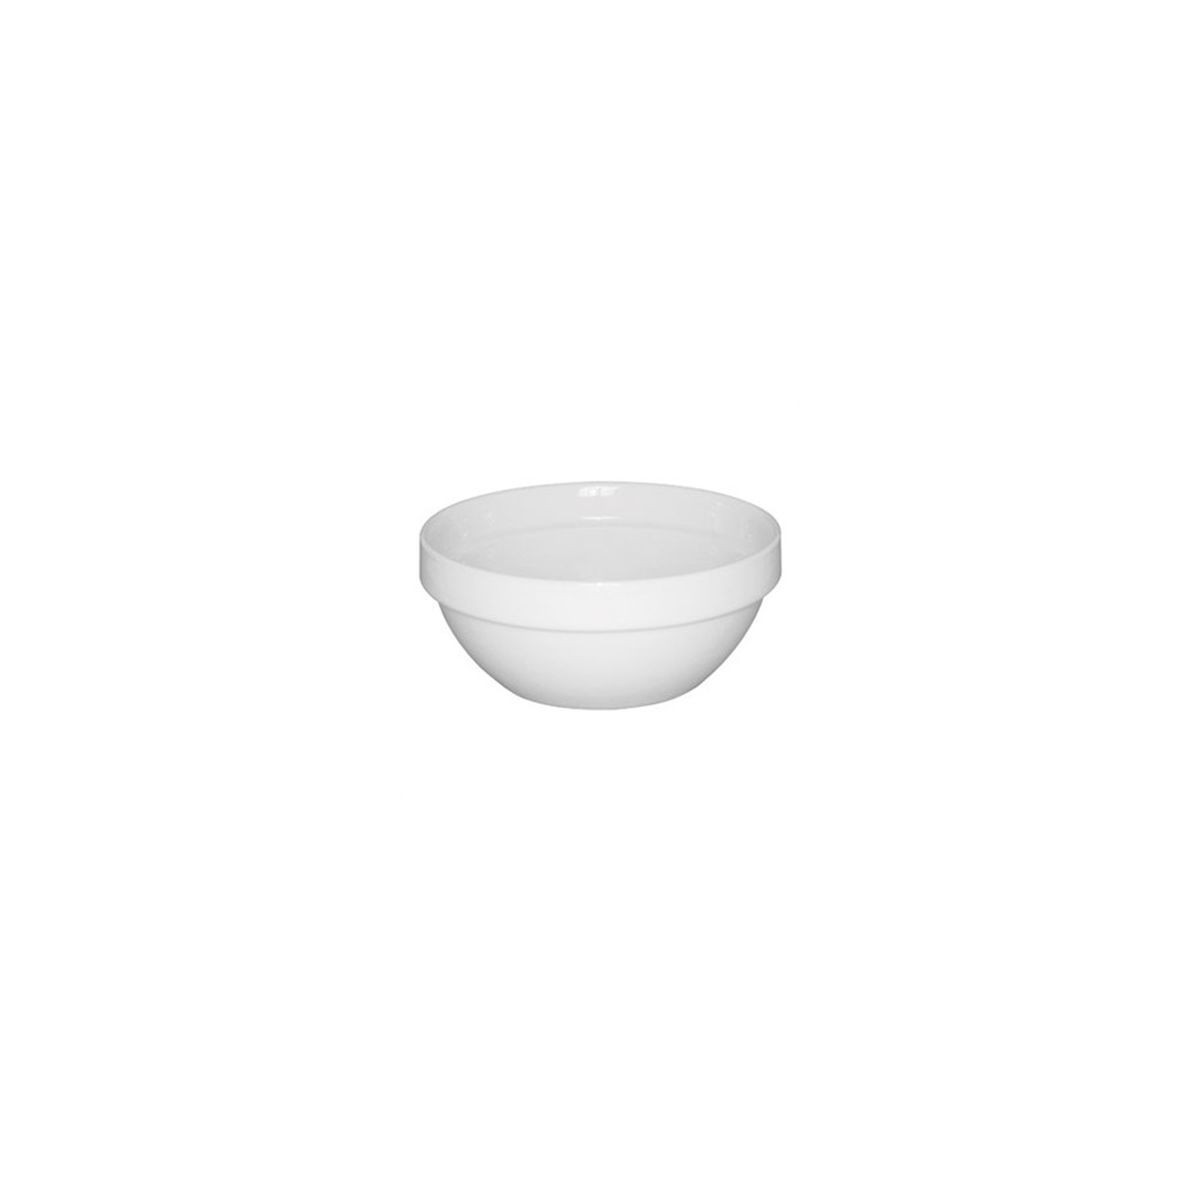 OLYMPIA BOL EMPILABLE 11CM PORCELAINE BLANCHE